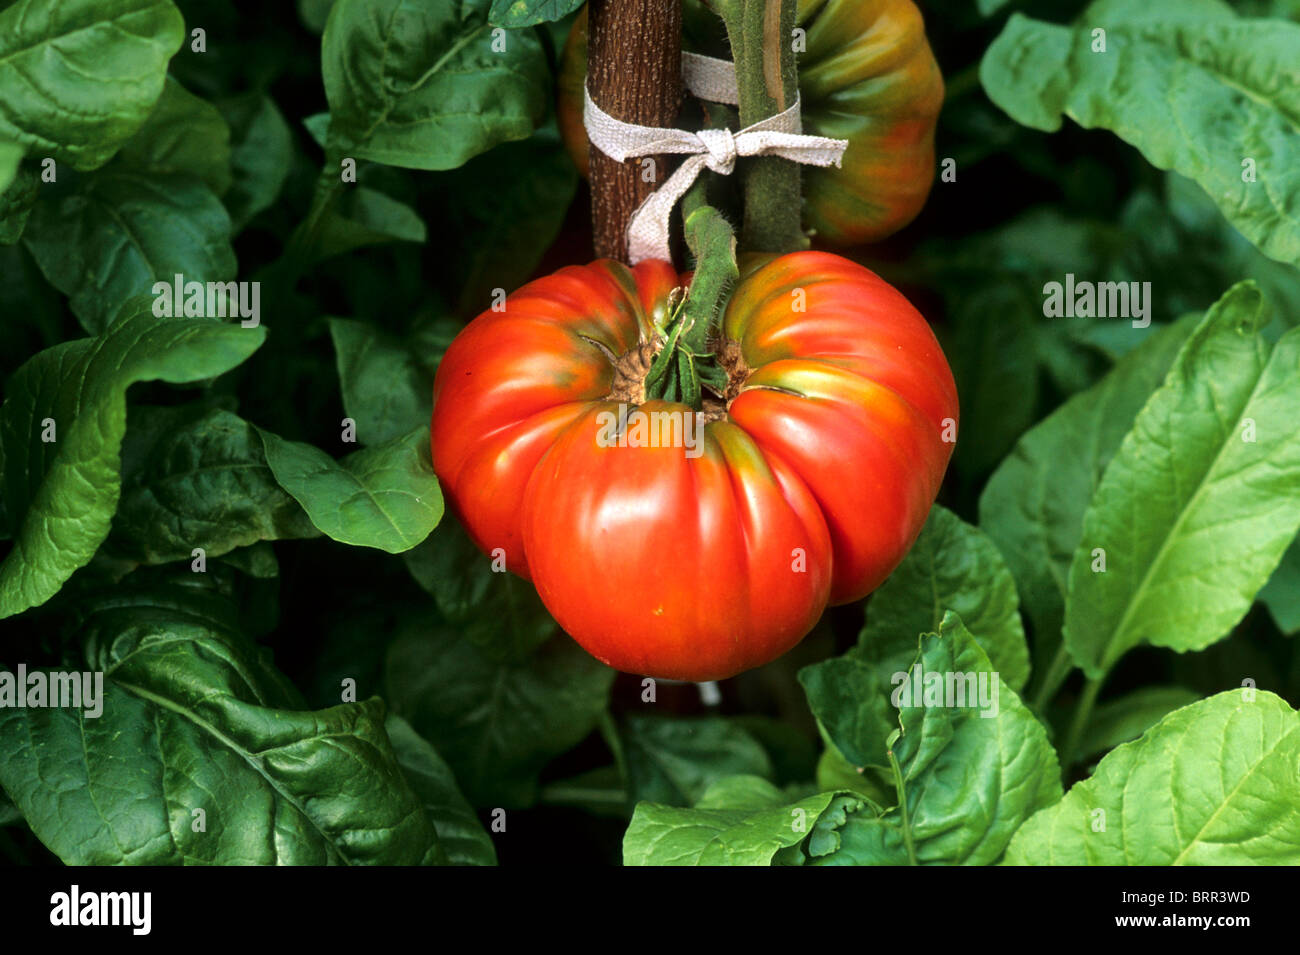 Ripe red tomato growing on a vine amongst spinach plants Stock Photo